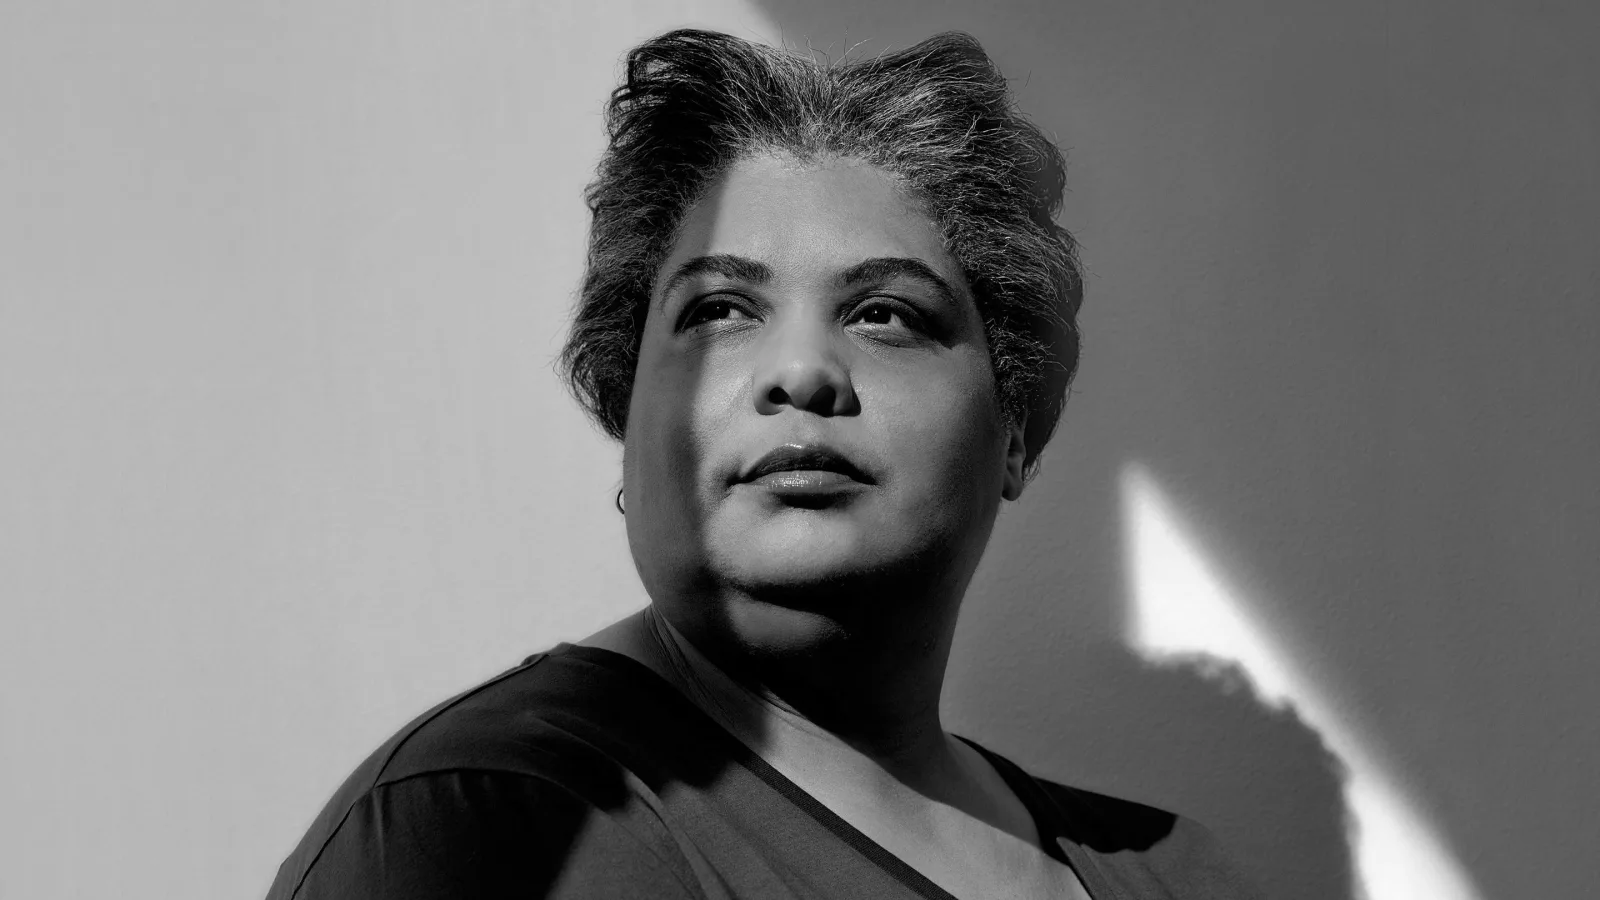 2019 - Playboy profiles Roxanne Gay, one of the most important and accessible feminist cultural commentators of our time. (Image: Roxanne Gay by Ryan Pfluger.)